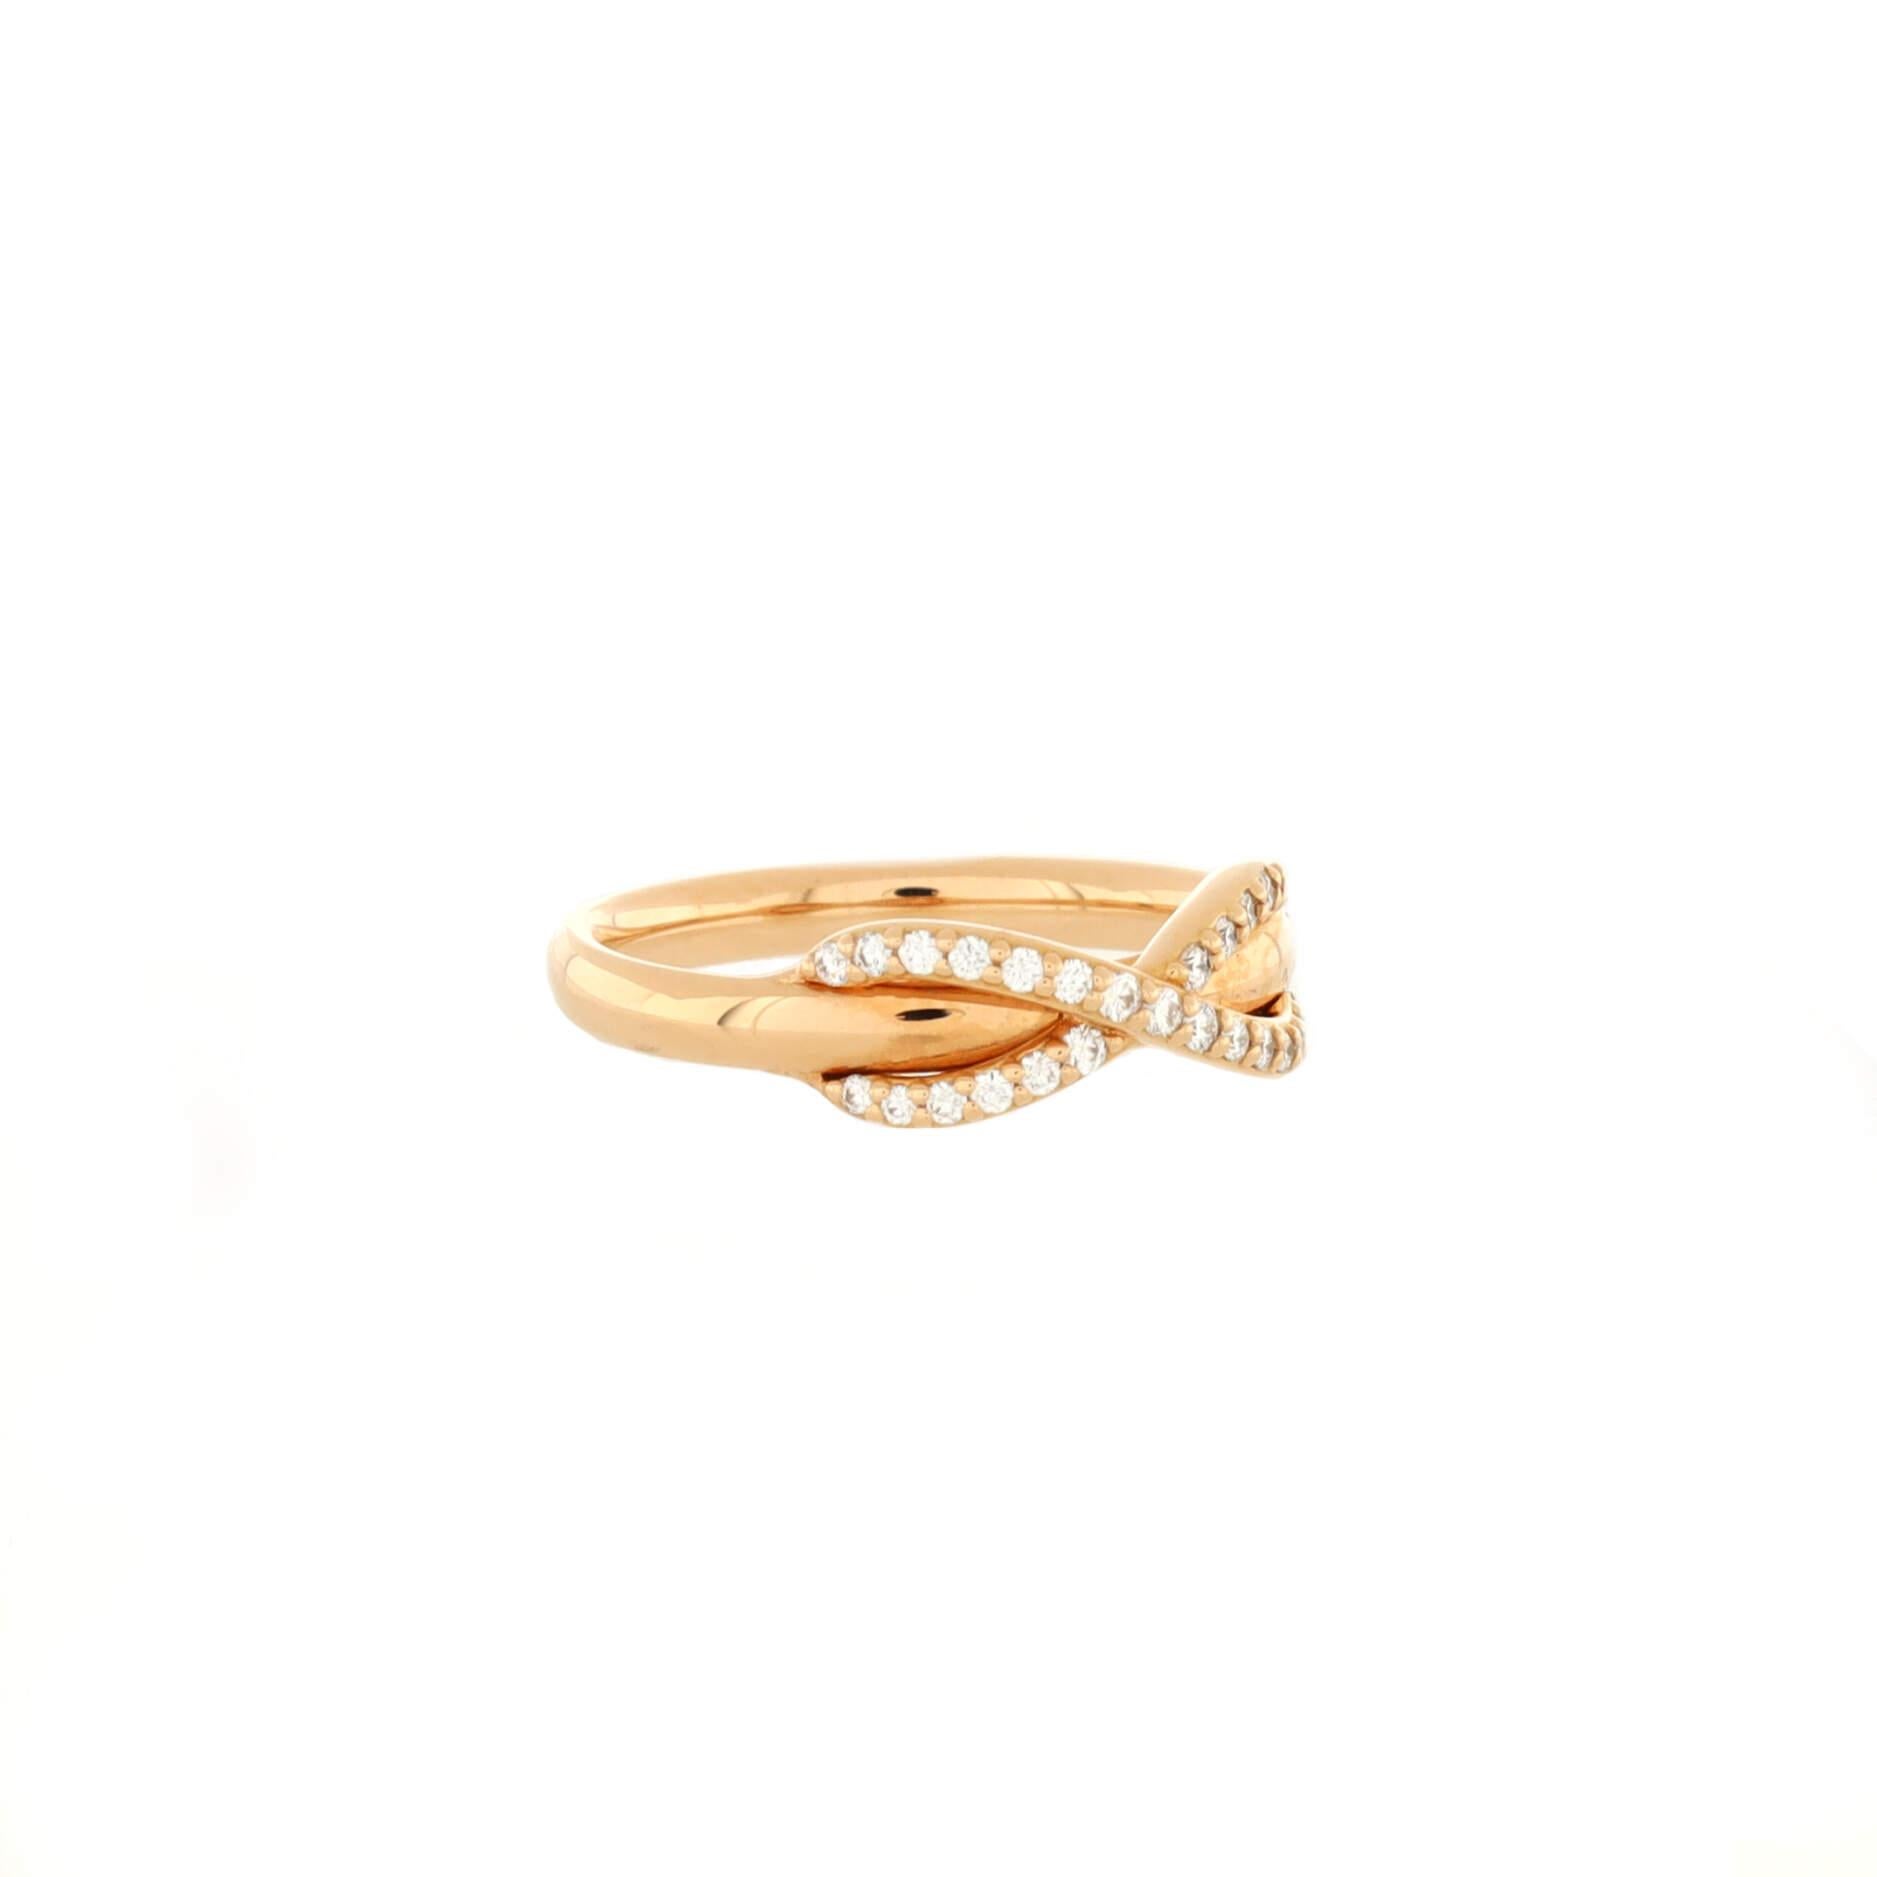 Condition: Excellent. Faint wear throughout.
Accessories: No Accessories
Measurements: Size: 4.5, Width: 2.45 mm
Designer: Tiffany & Co.
Model: Infinity Ring 18K Rose Gold and Diamonds
Exterior Color: Rose Gold
Item Number: 200180/3